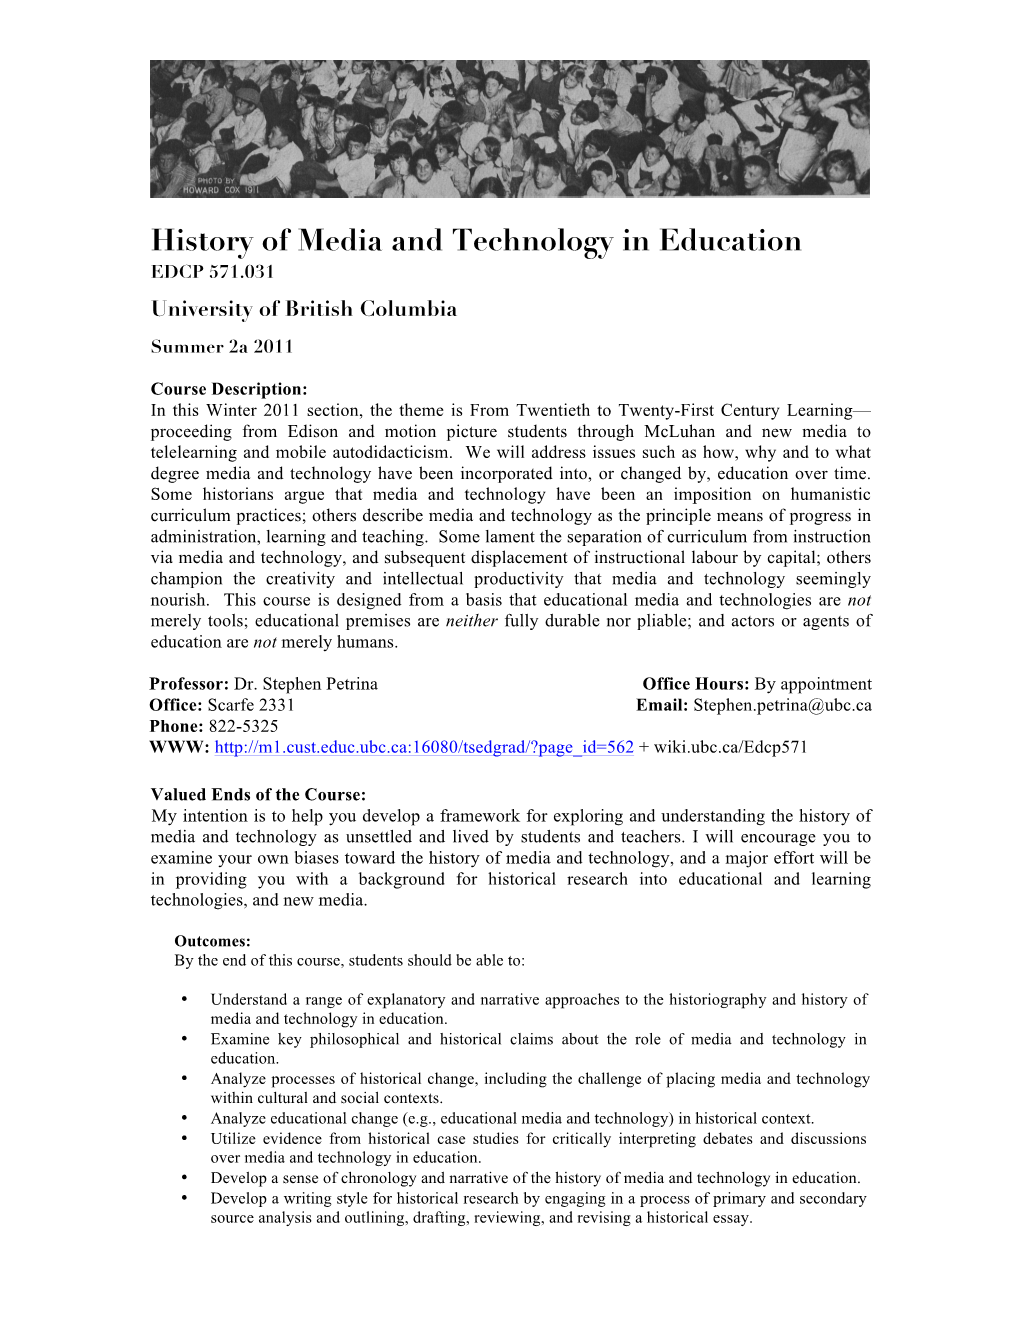 History of Media and Technology in Education EDCP 571.031 University of British Columbia Summer 2A 2011